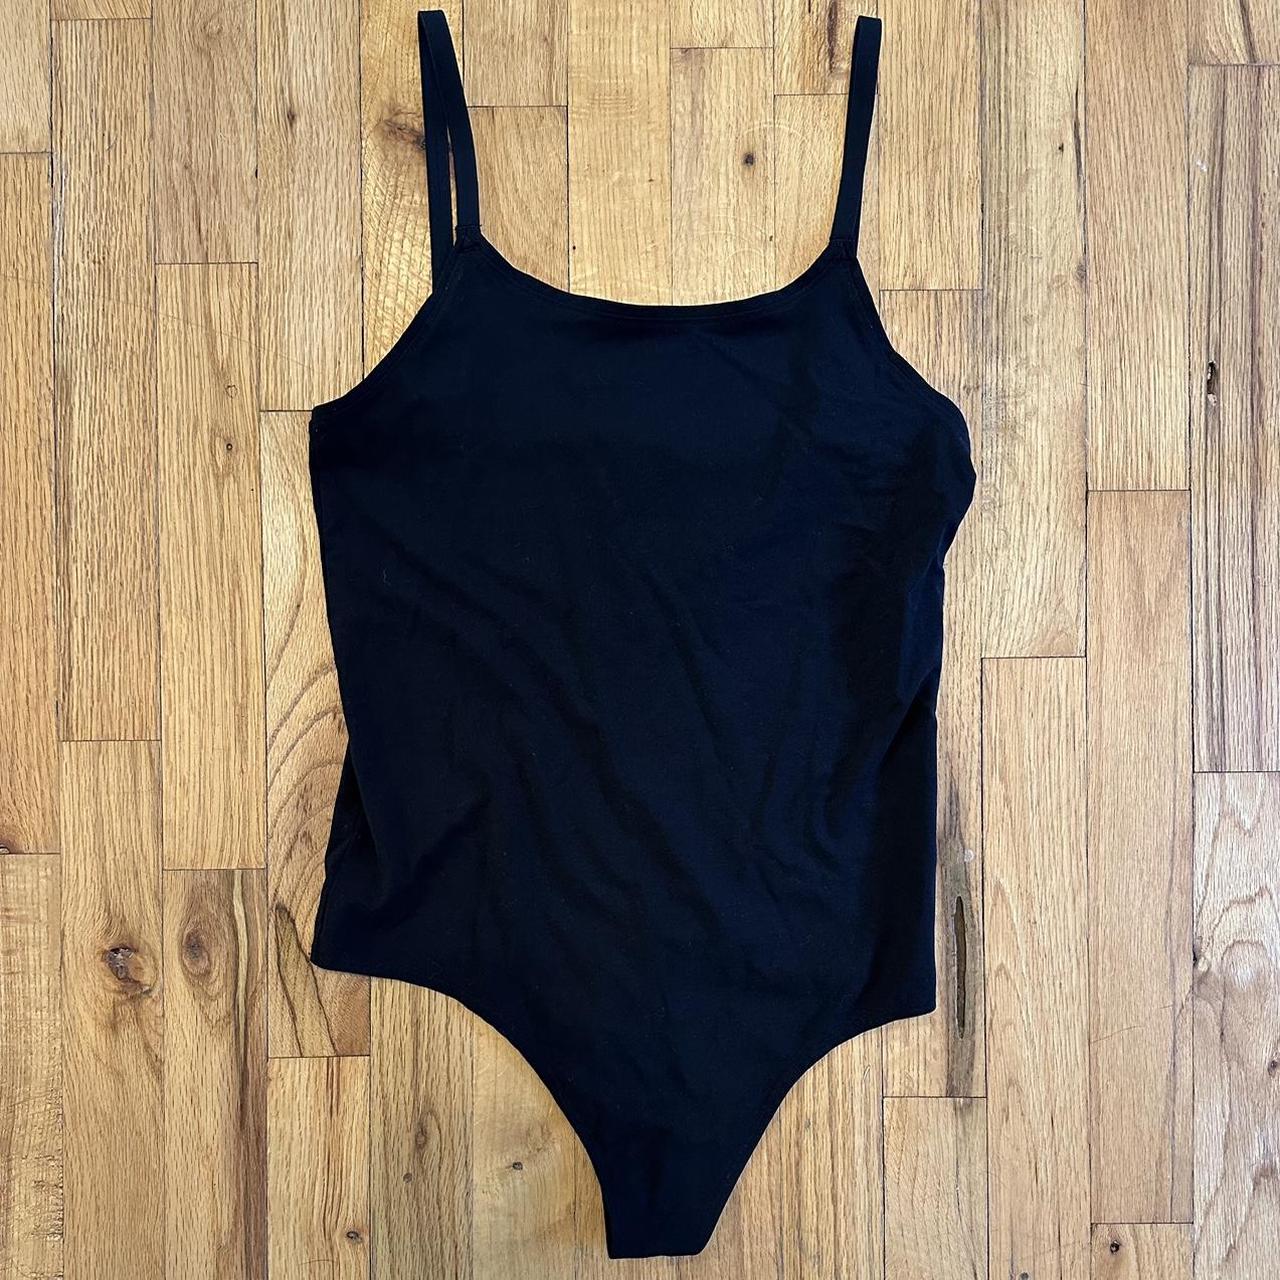 Suit Yourself Ribbed One Shoulder Bodysuit